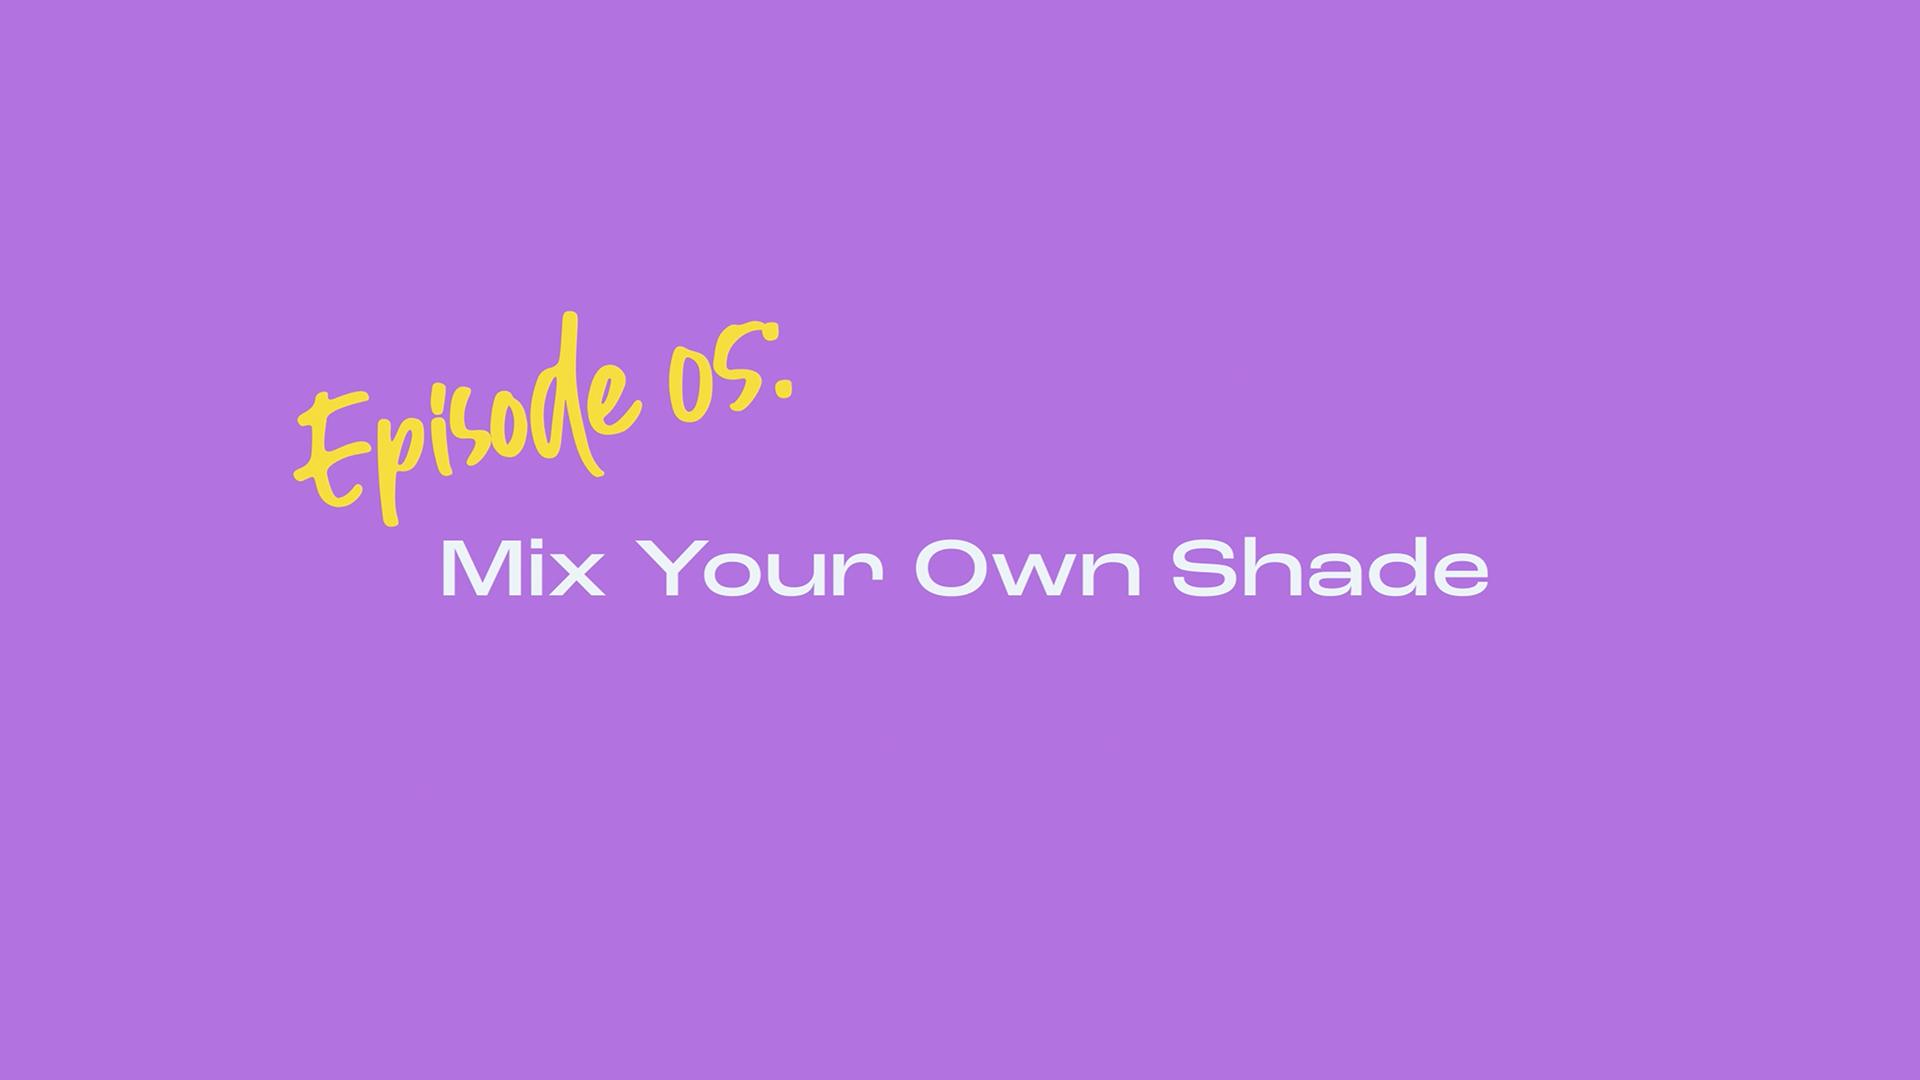 Painting It Easy
Mix Your Own Shade